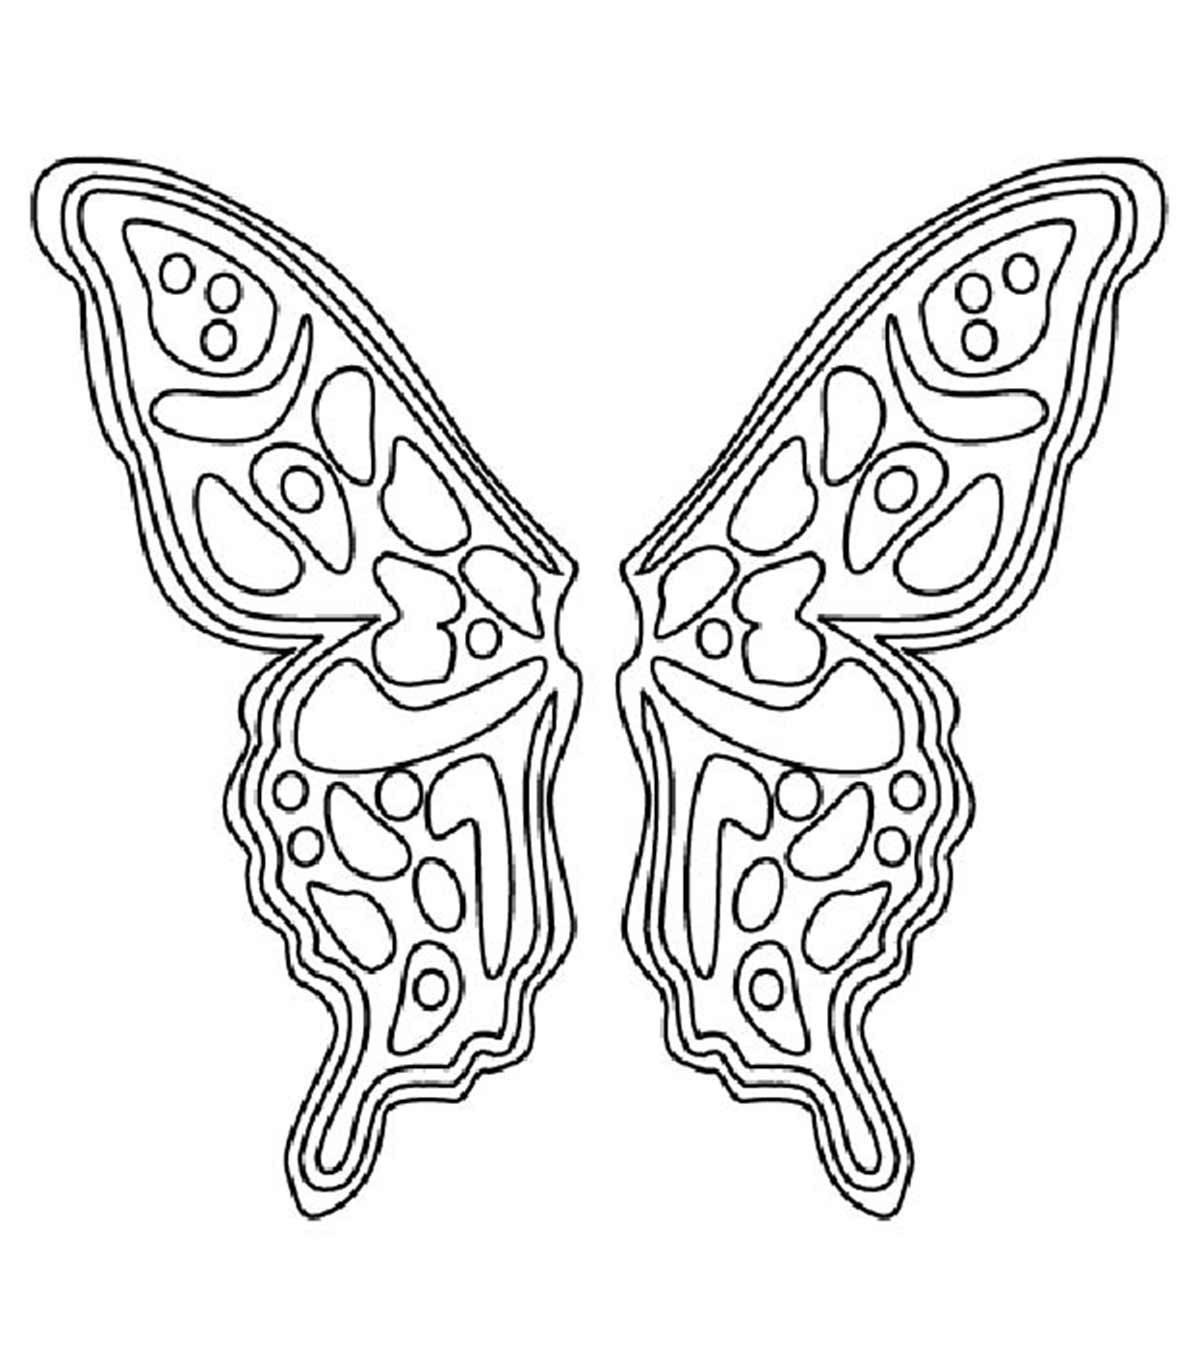 Download Top 20 Free Printable Pattern Coloring Pages Online